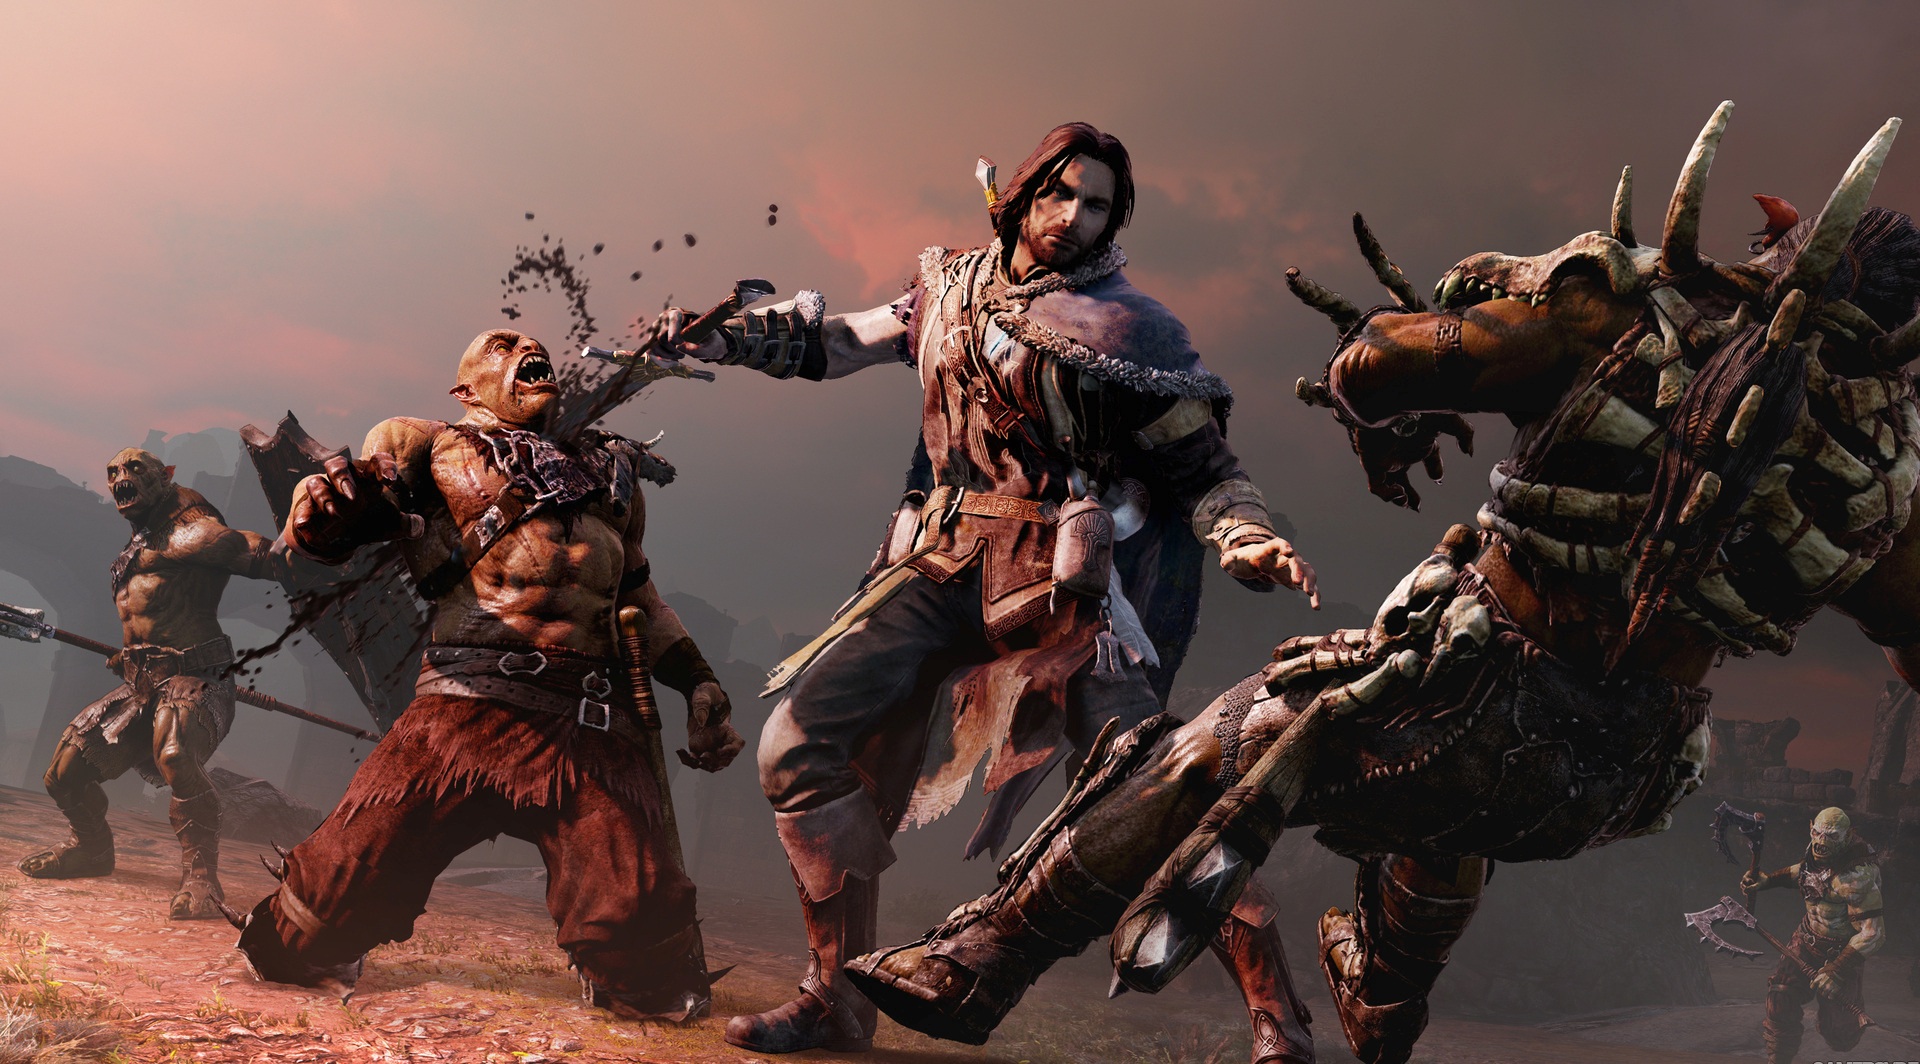 Middle-earth: Shadow of Mordor Dev Goes on Hiring Spree - GameSpot